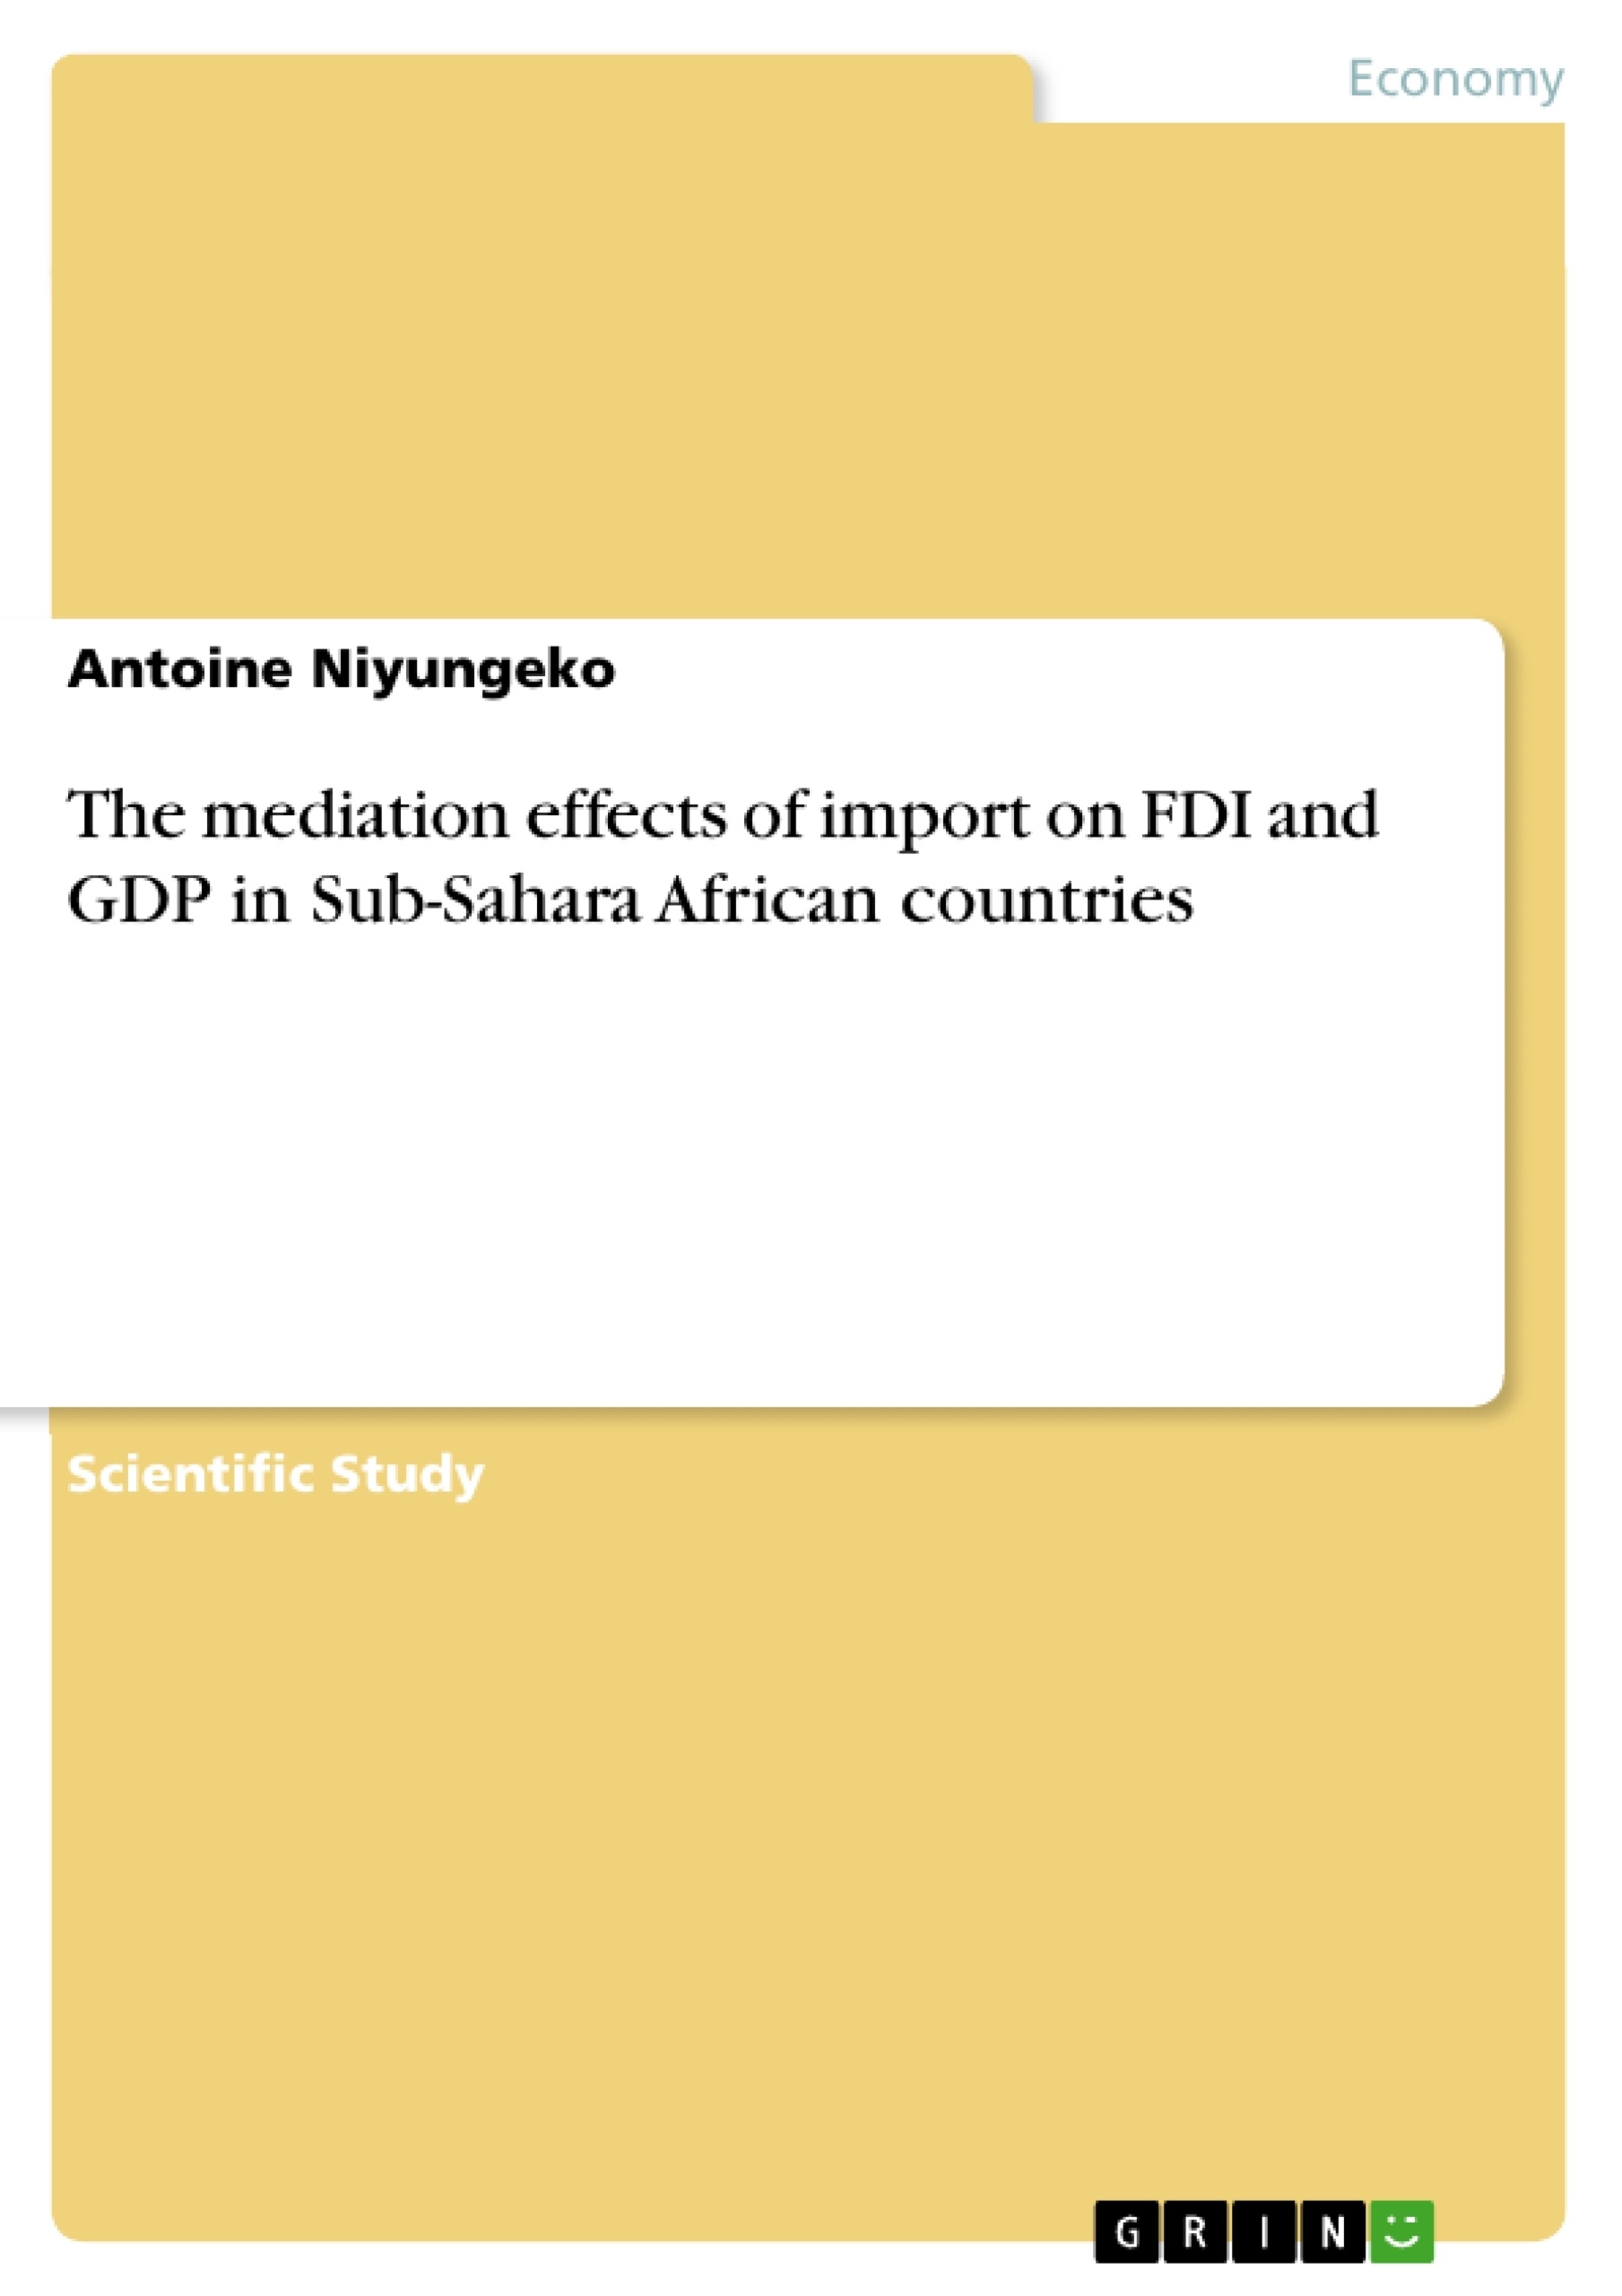 Title: The mediation effects of import on FDI and GDP in Sub-Sahara African countries